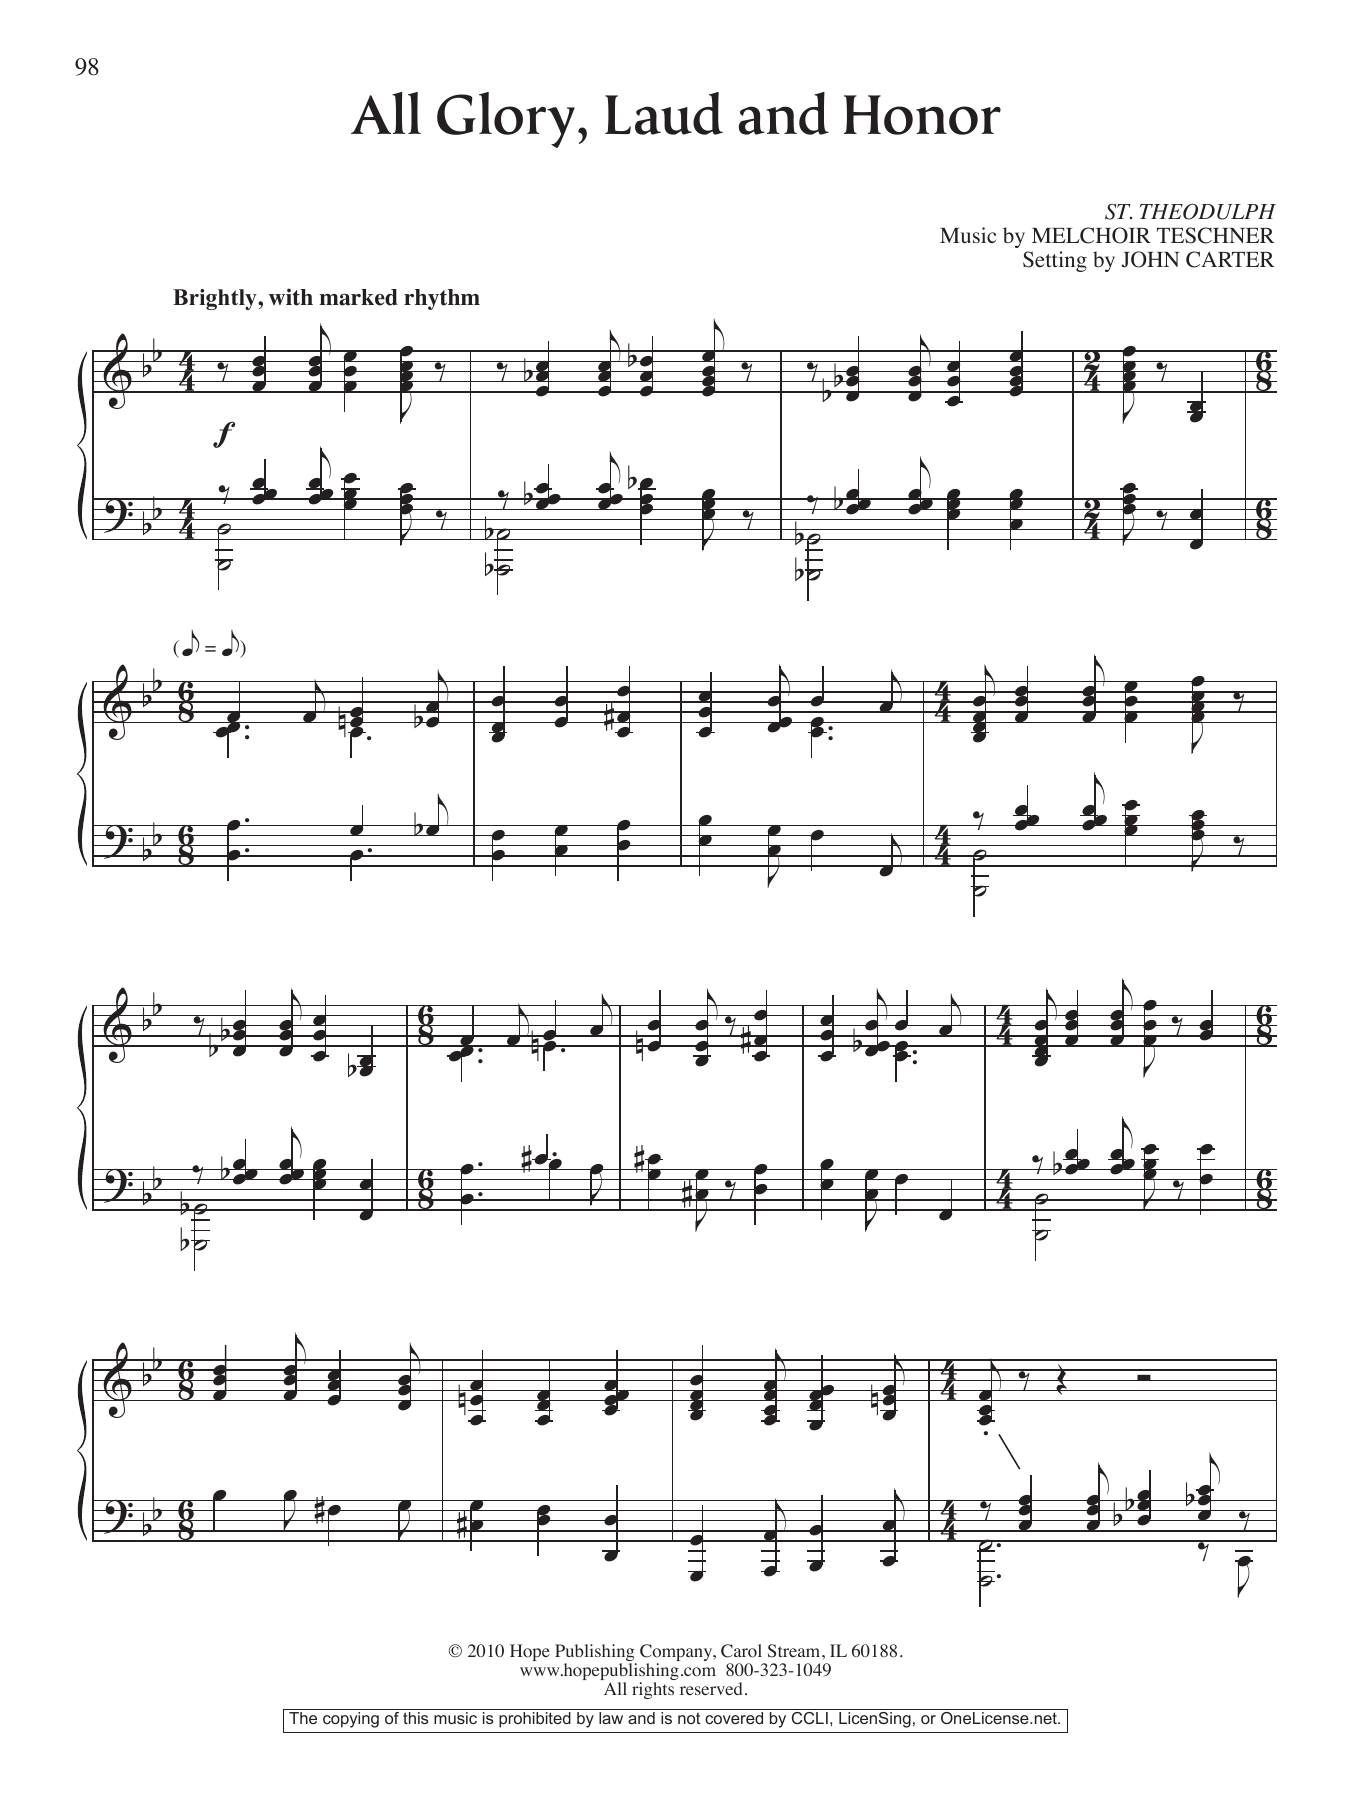 Download John Carter All Glory, Laud and Honor Sheet Music